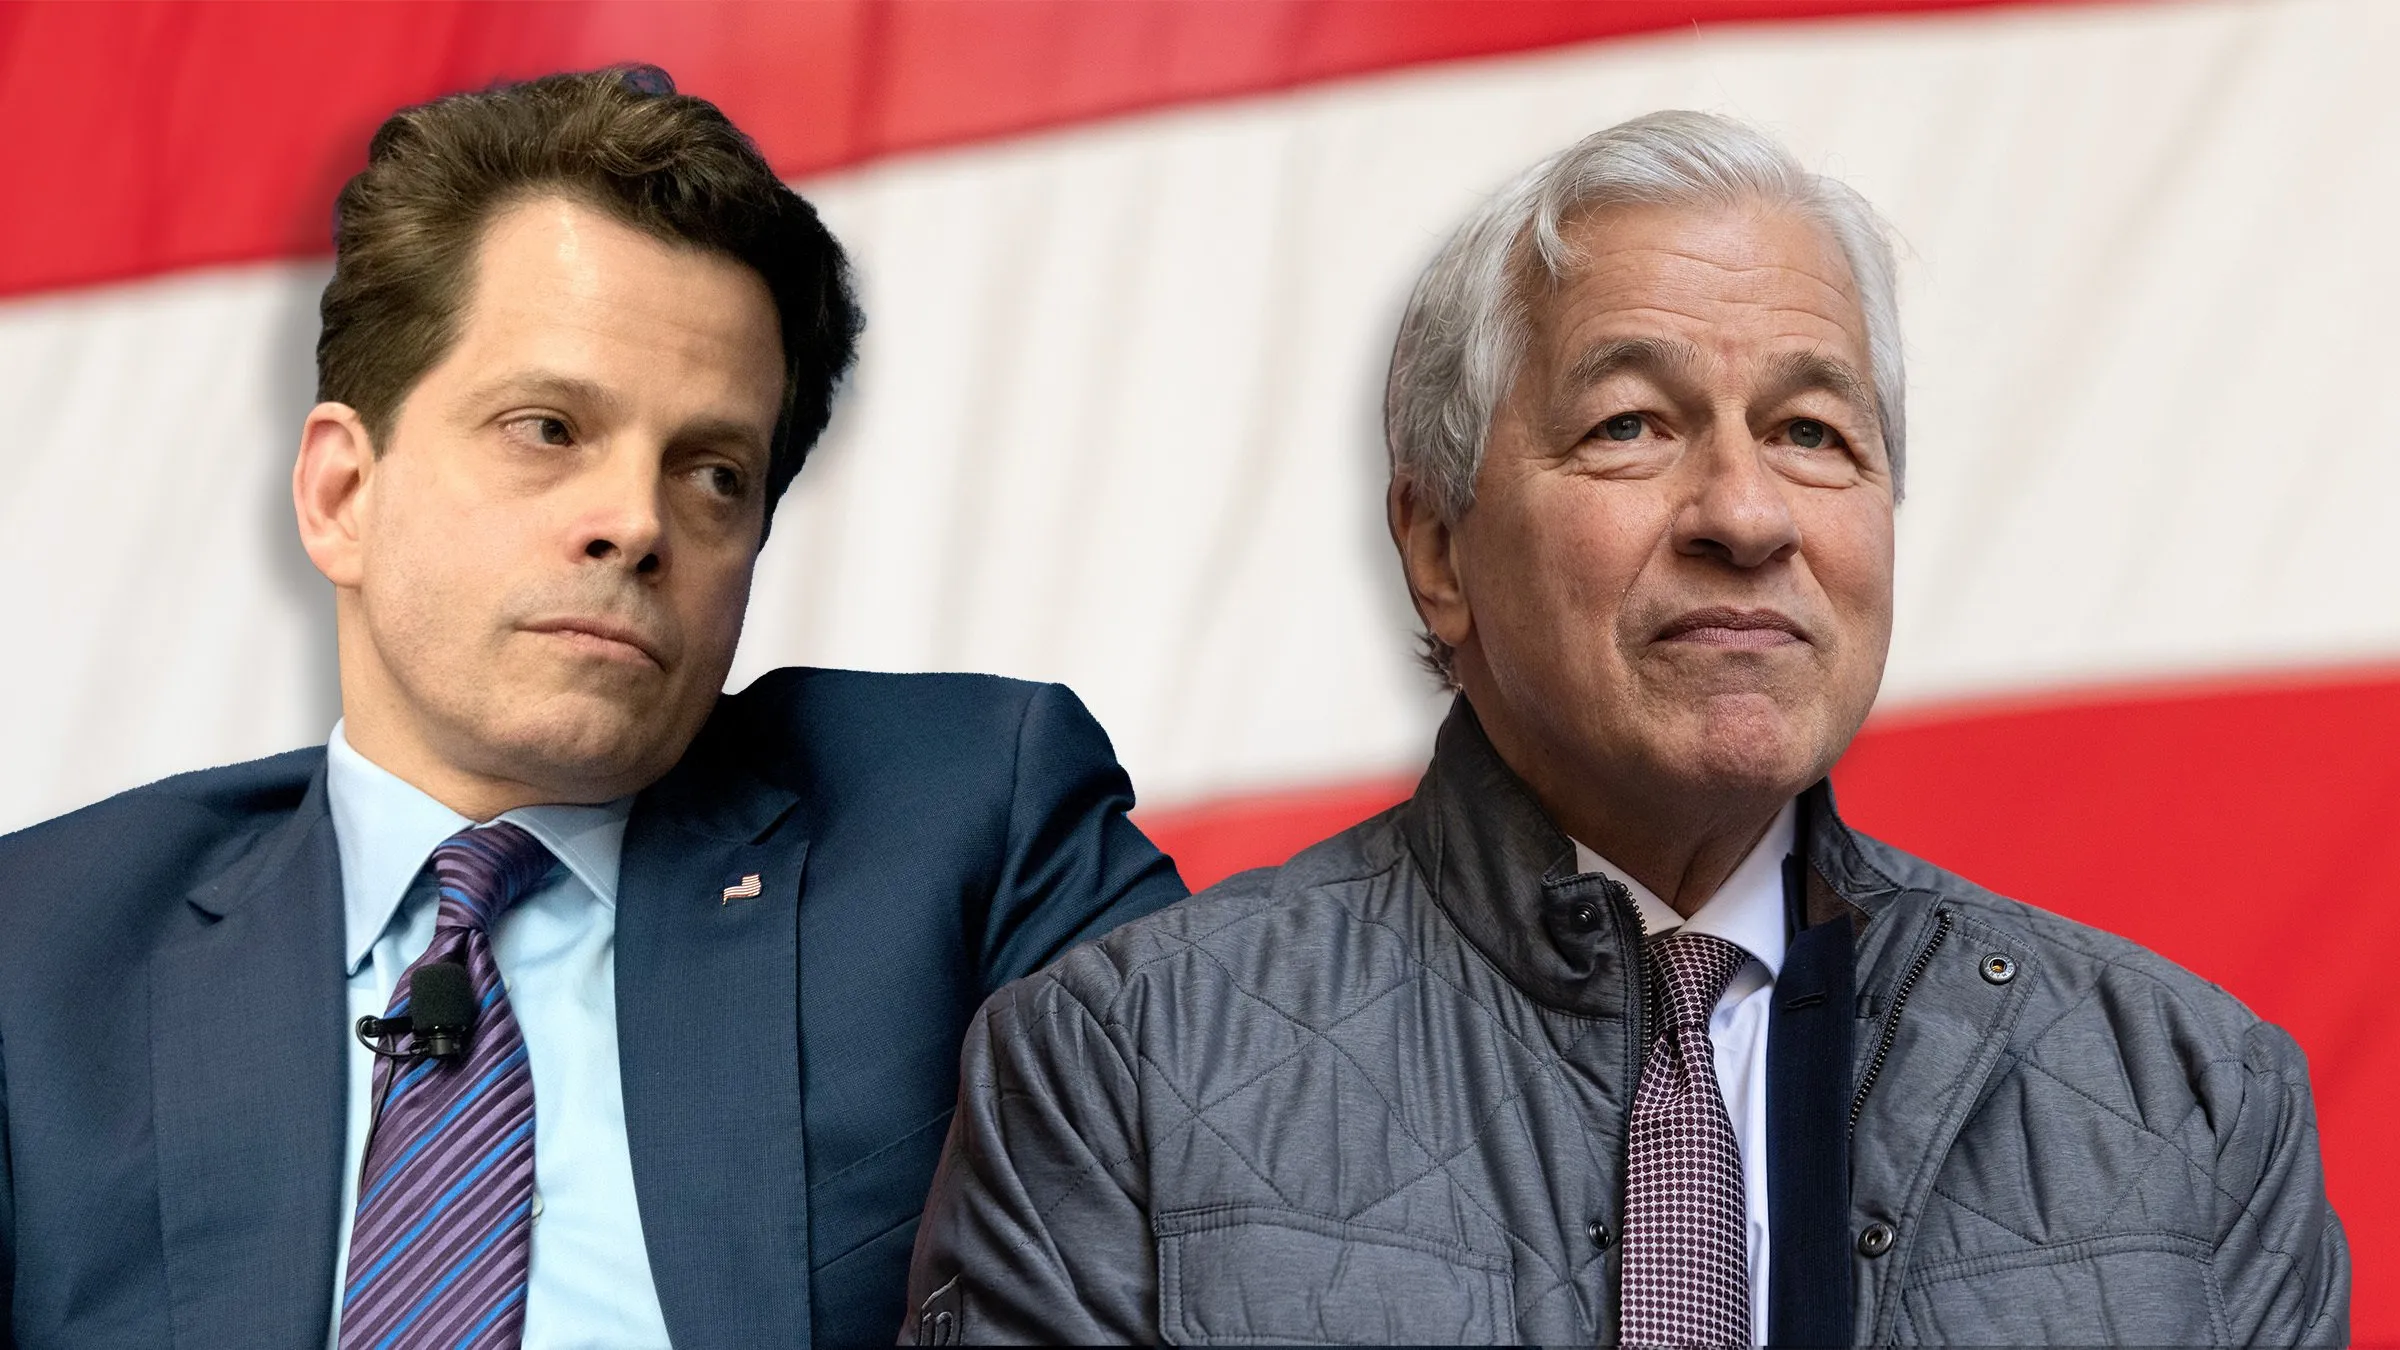 Anthony Scaramucci and Jamie Dimon. Photo illustration. Images: Al Teich and Lev Radin/Shutterstock